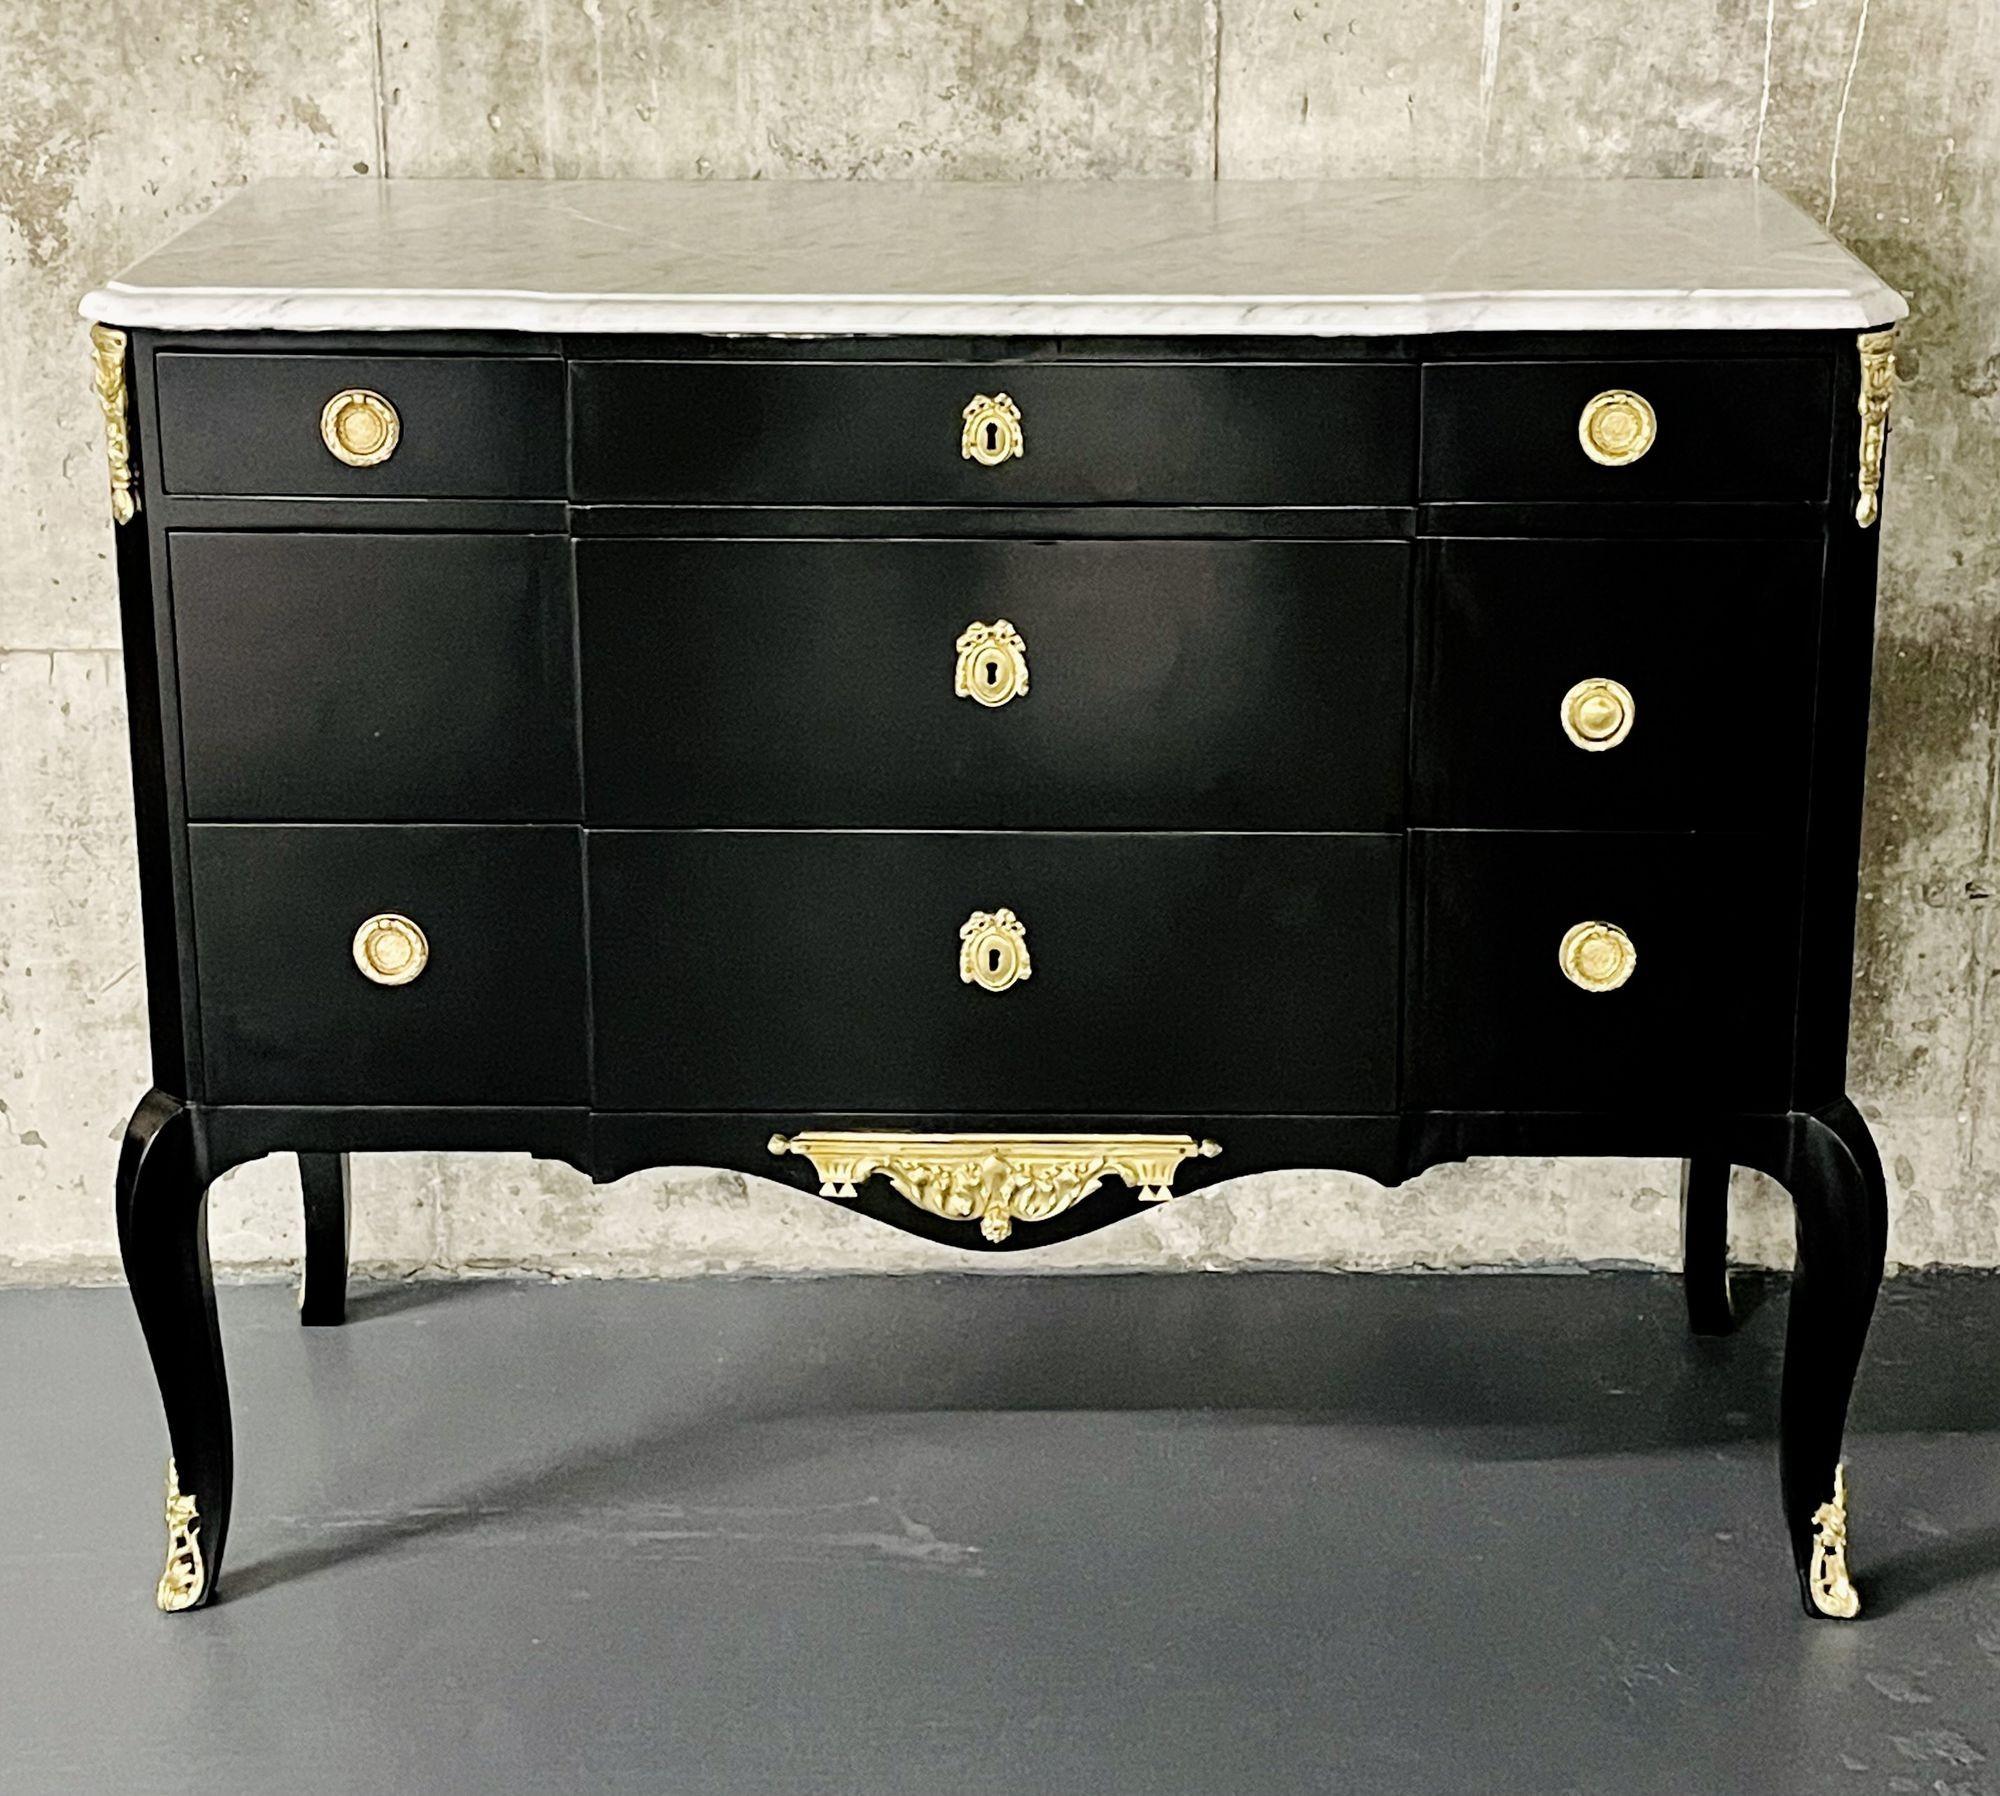 An Ebony Louis XV commode or chest in the Hollywood Regency Fashion.
 
This stunning French chest or commode has three over two drawers in the blockfront form with bronze pulls. The recently refinished chest leaves no stone unturned and is in